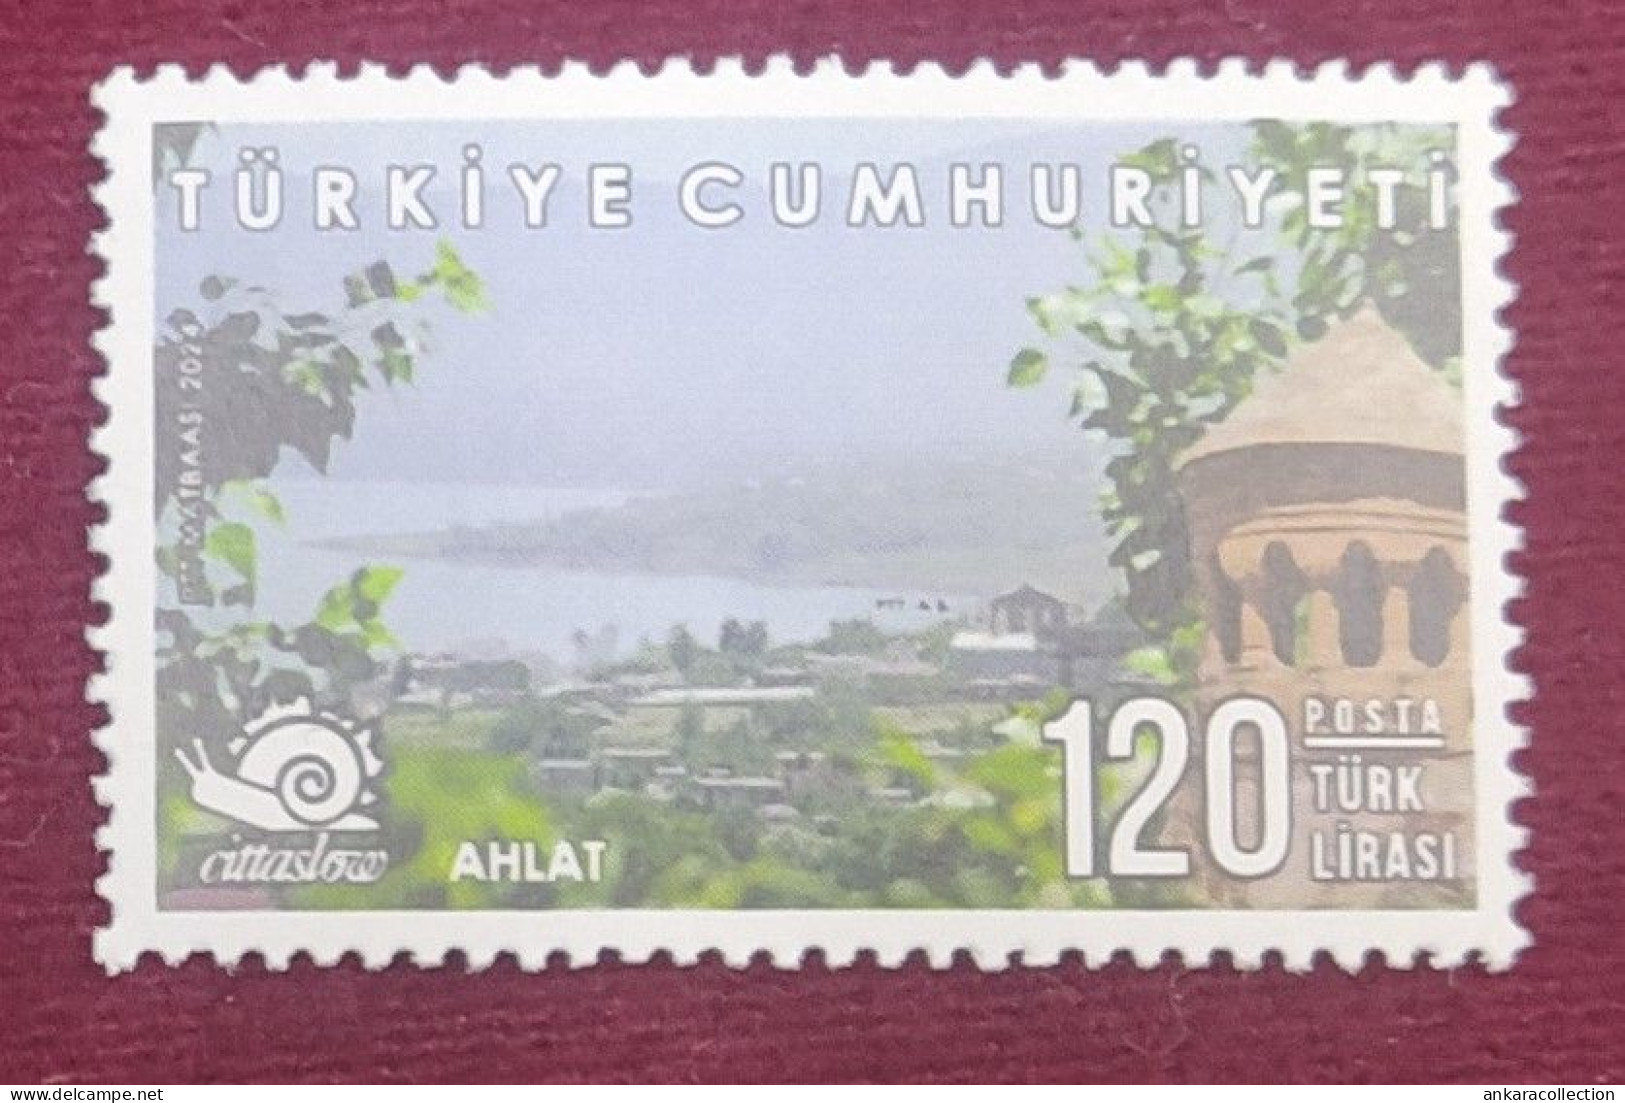 AC - TURKEY STAMP  THE  DEFINITIVE POSTAGE STAMP WITH THE THEME OF CITTASLOW-4 MNH  22 MARCH 2024 - Nuevos